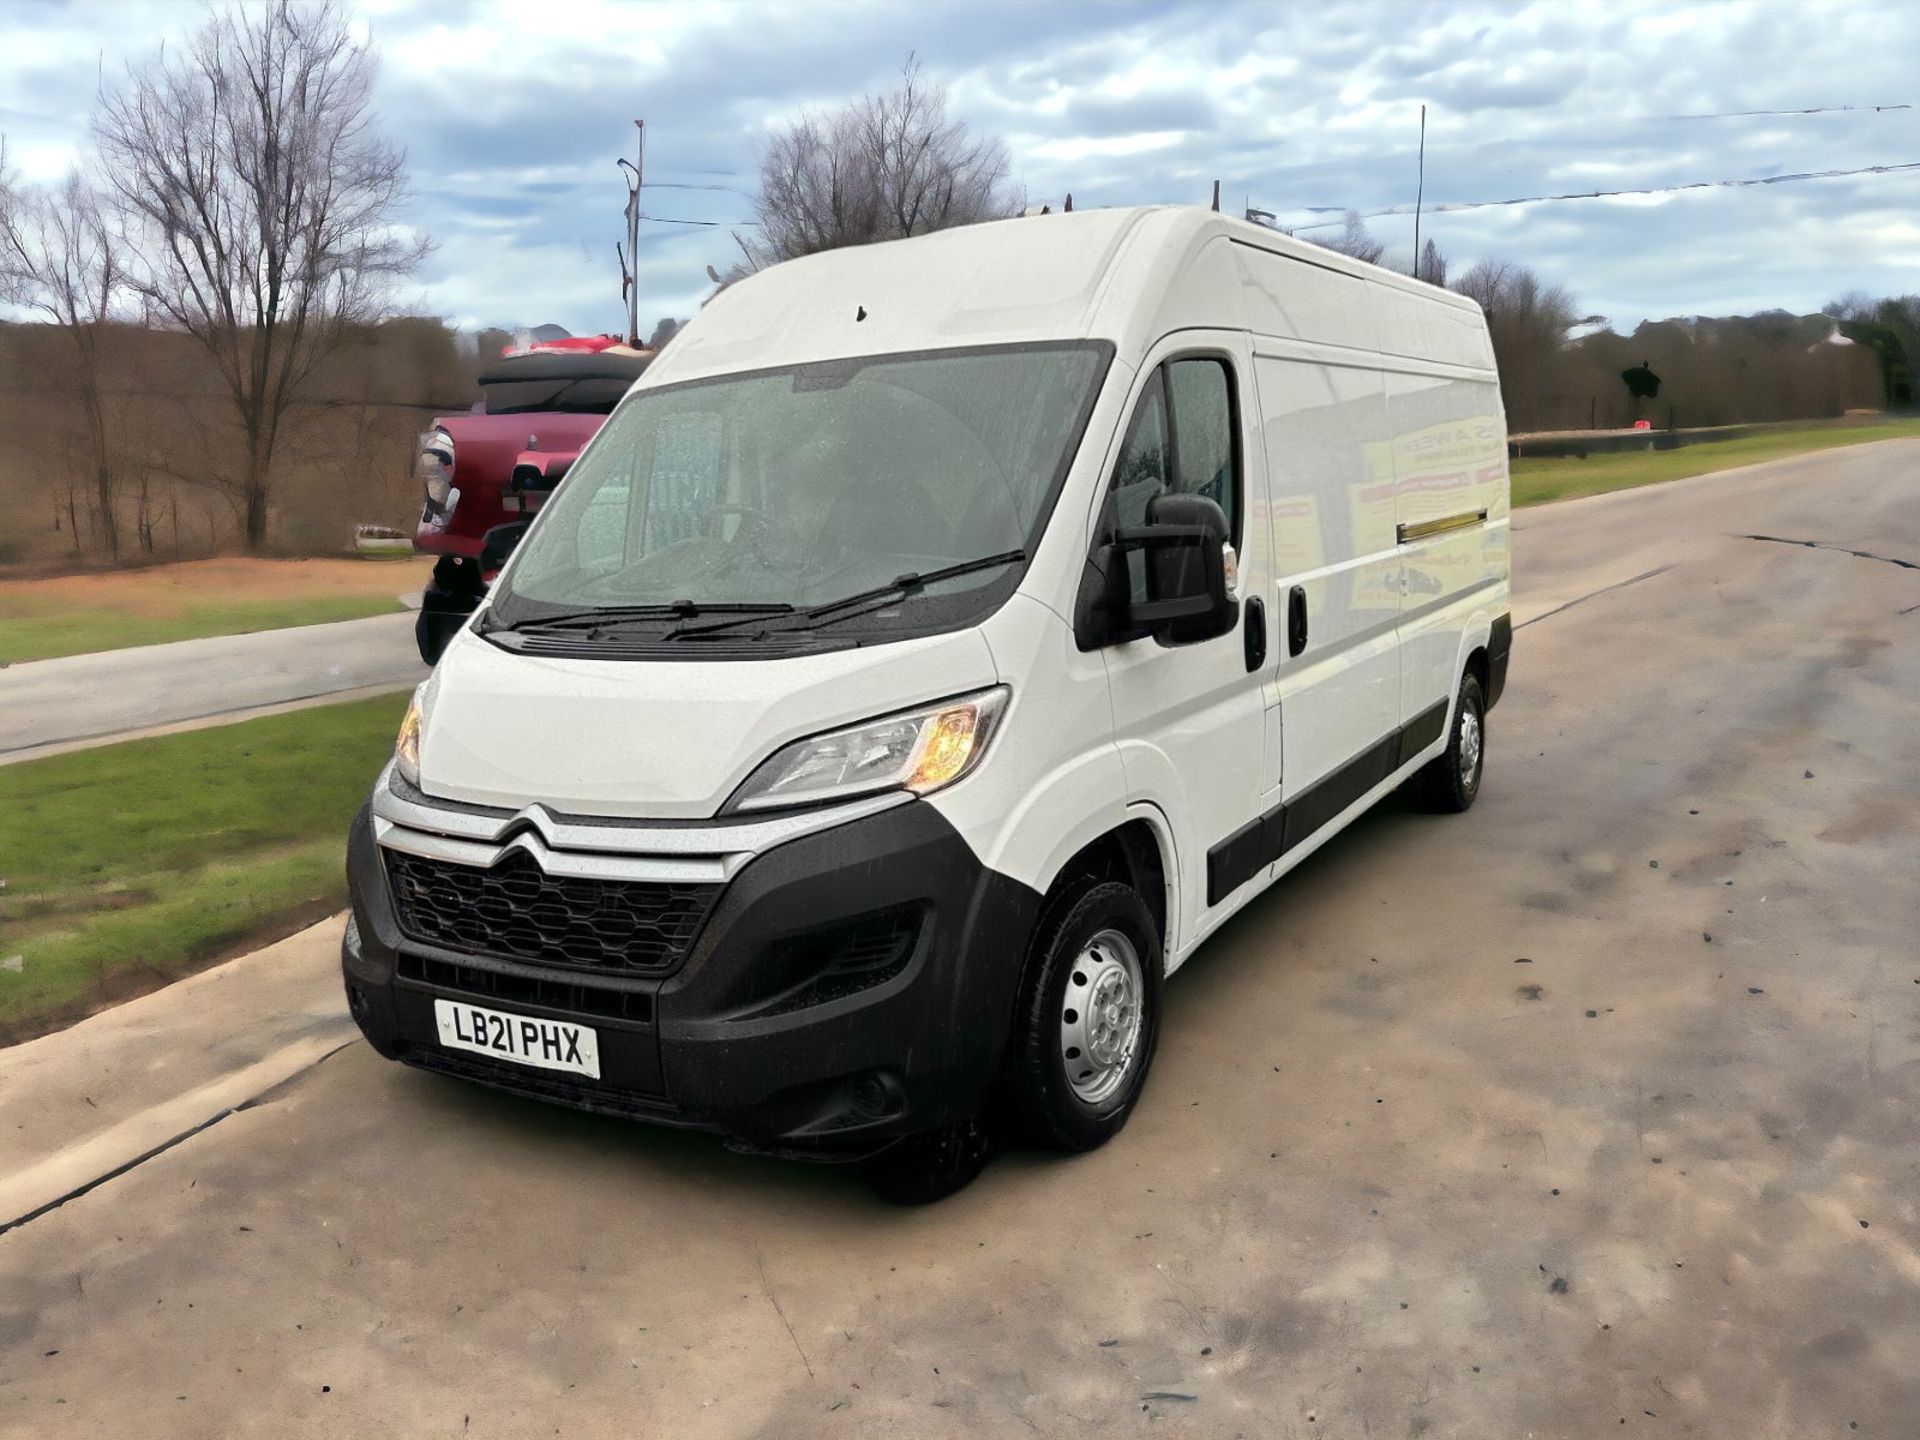 2021-21 REG CITROEN RELAY 35 L3H2 BHDI -HPI CLEAR - READY FOR WORK! - Image 2 of 13